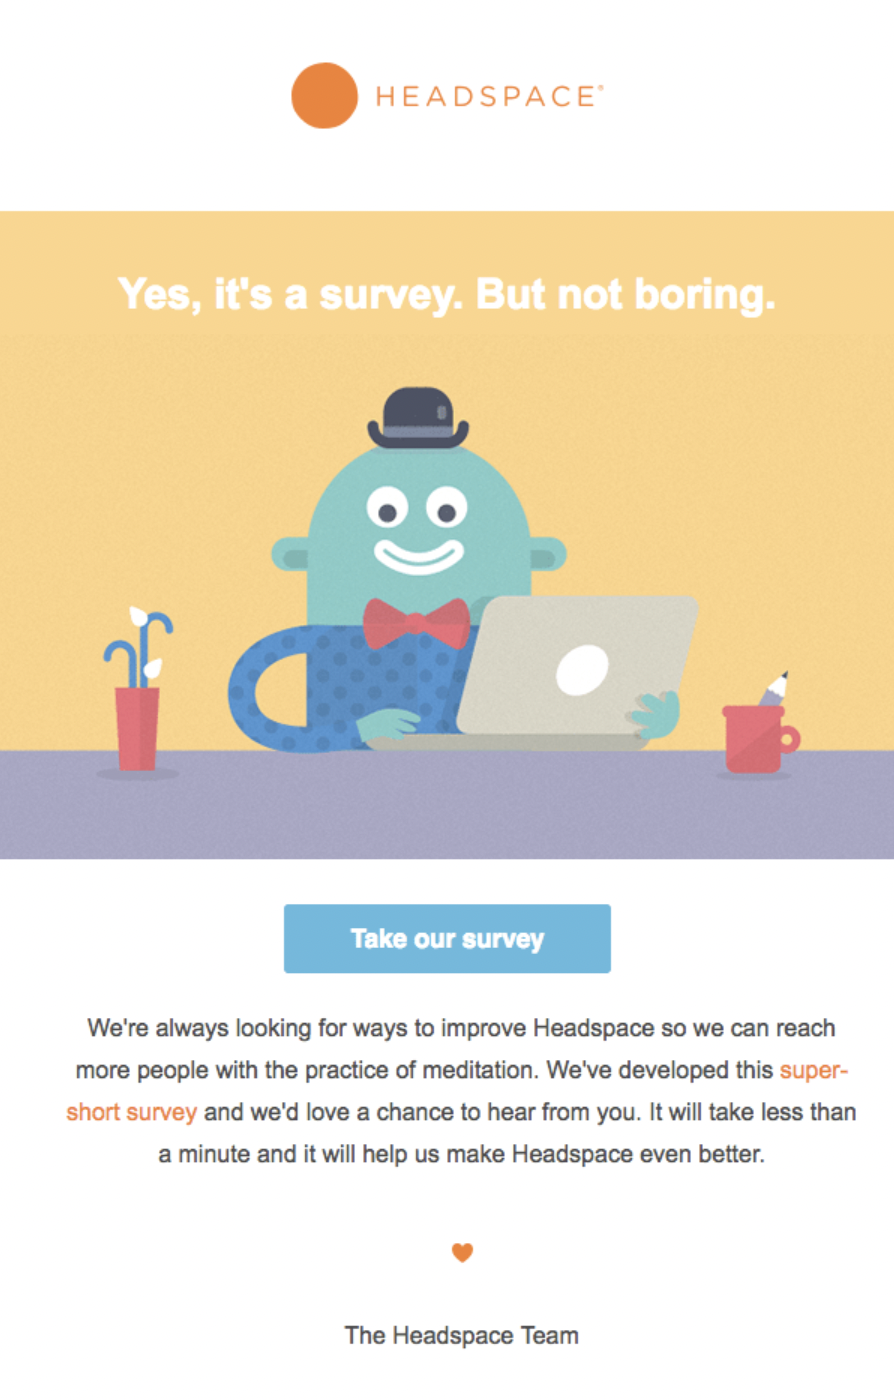 An email from Headspace, prompting users to fill out their survey